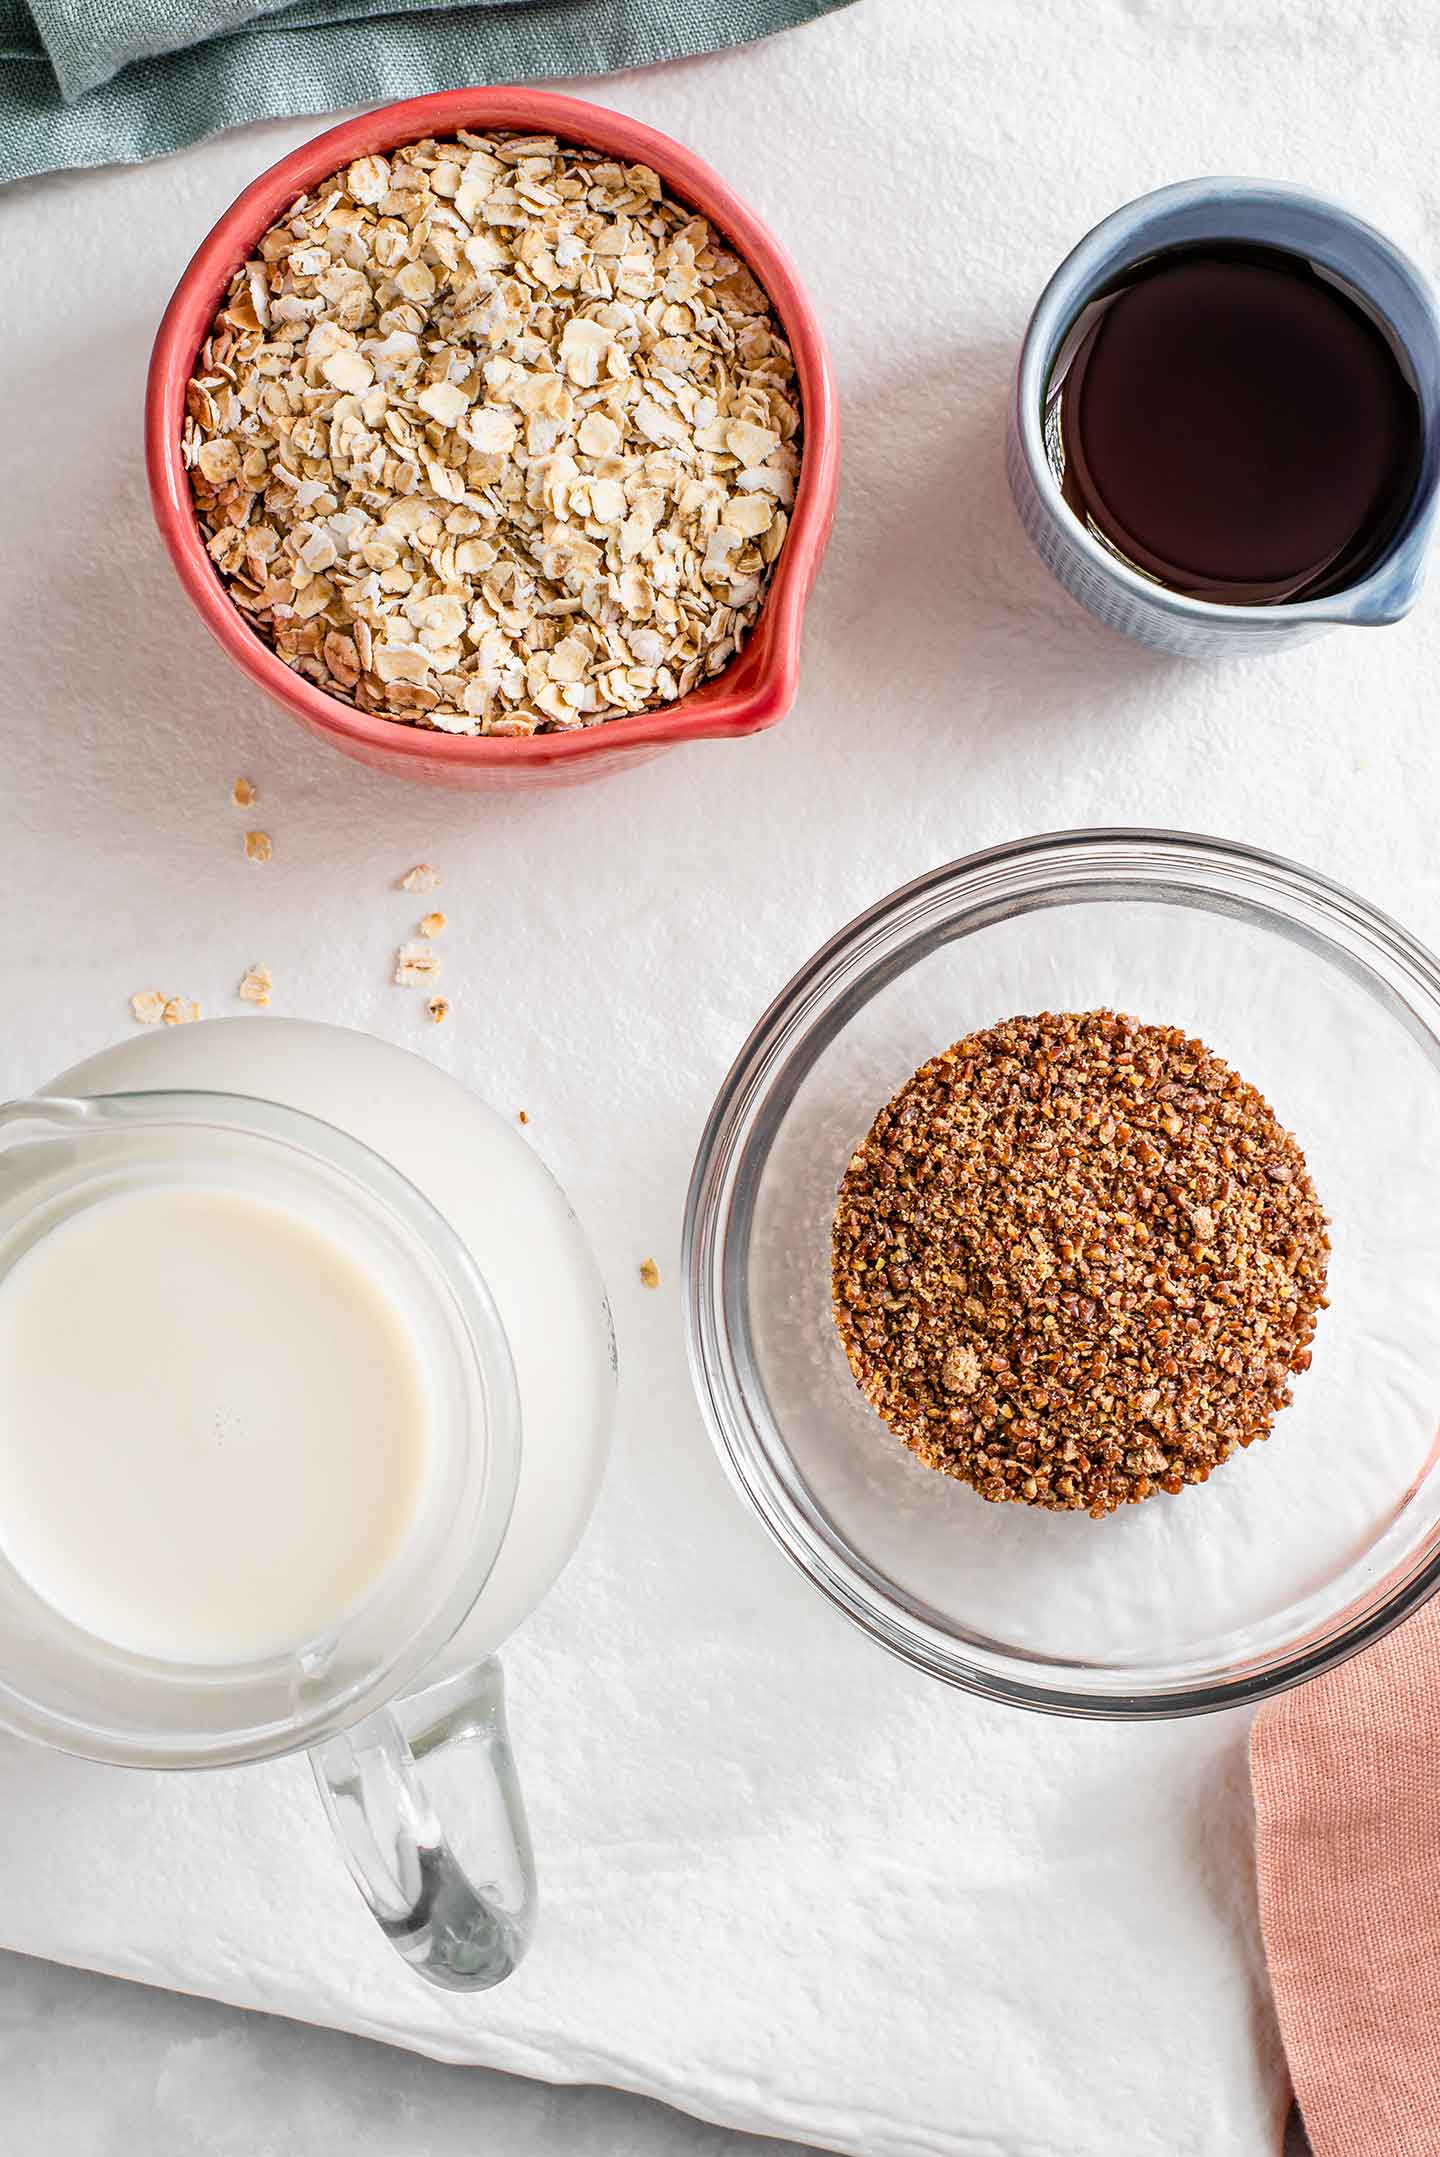 Top down view of ground flaxseeds in a small glass bowl with quick oats, maple syrup, and a small carafe of milk also displayed on a white tray.